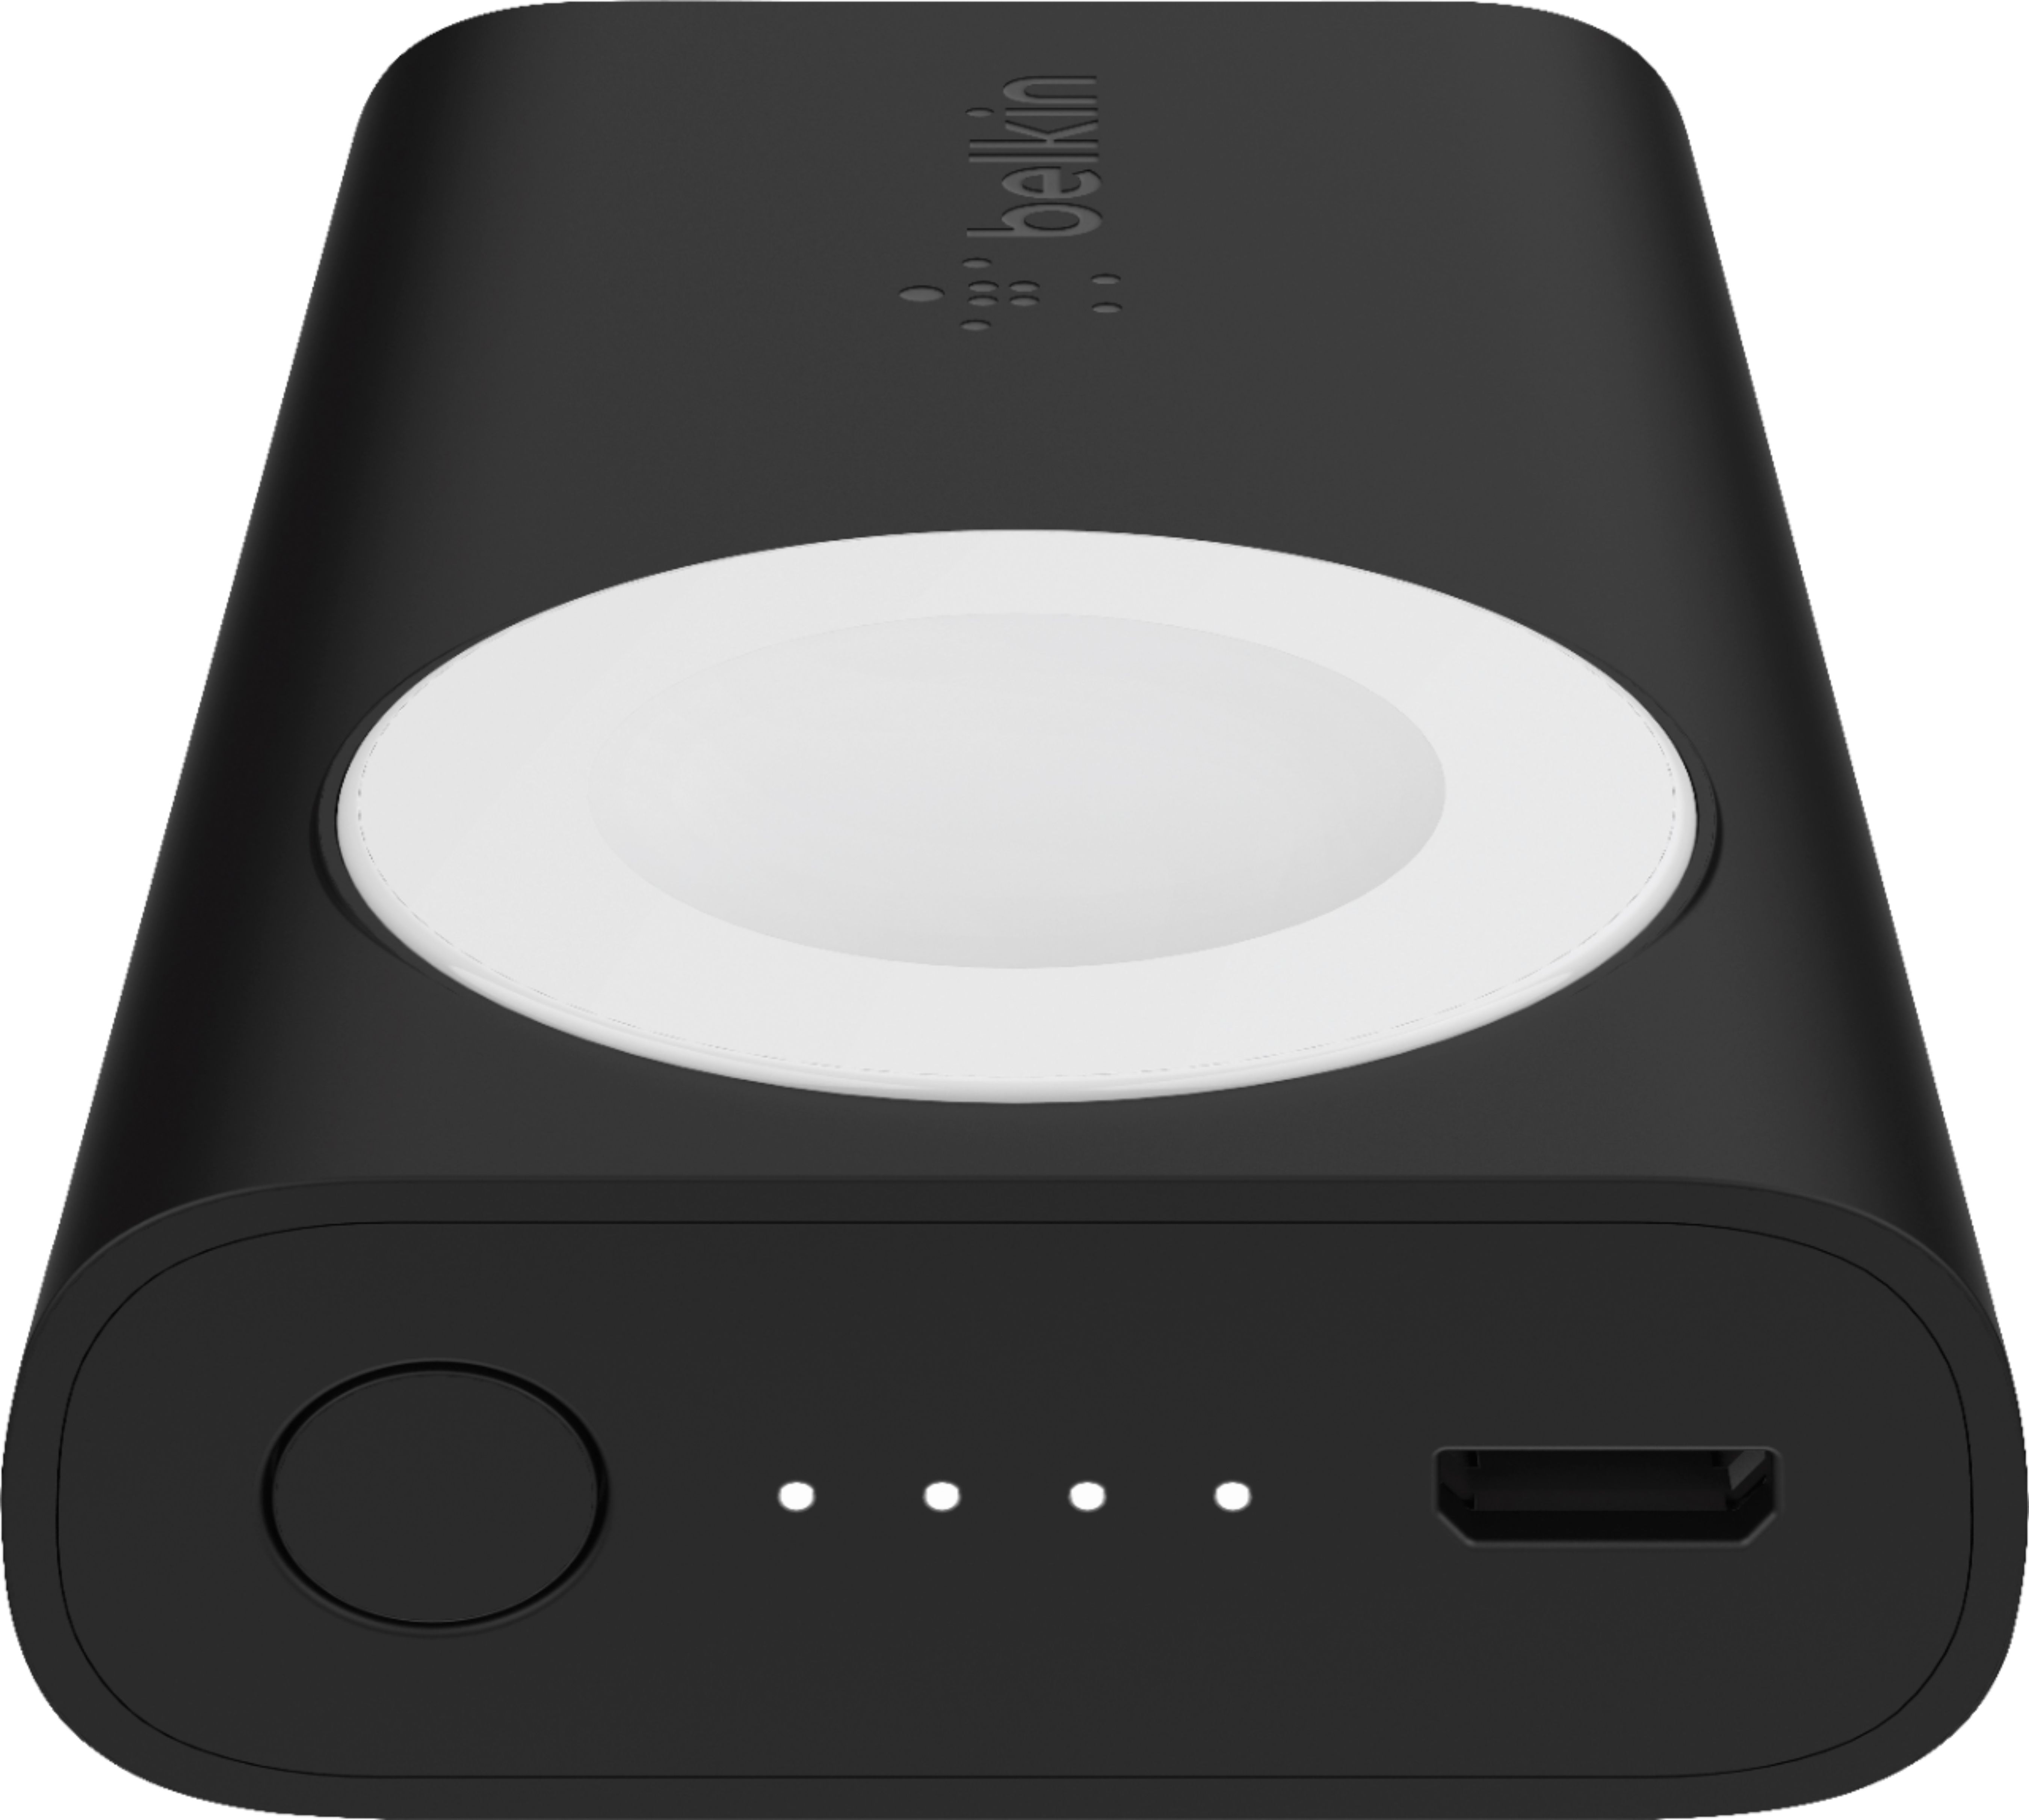 Belkin Boost Charge 2200 mAh Portable Charger for Apple Watch Black  F8J233BTBLK - Best Buy